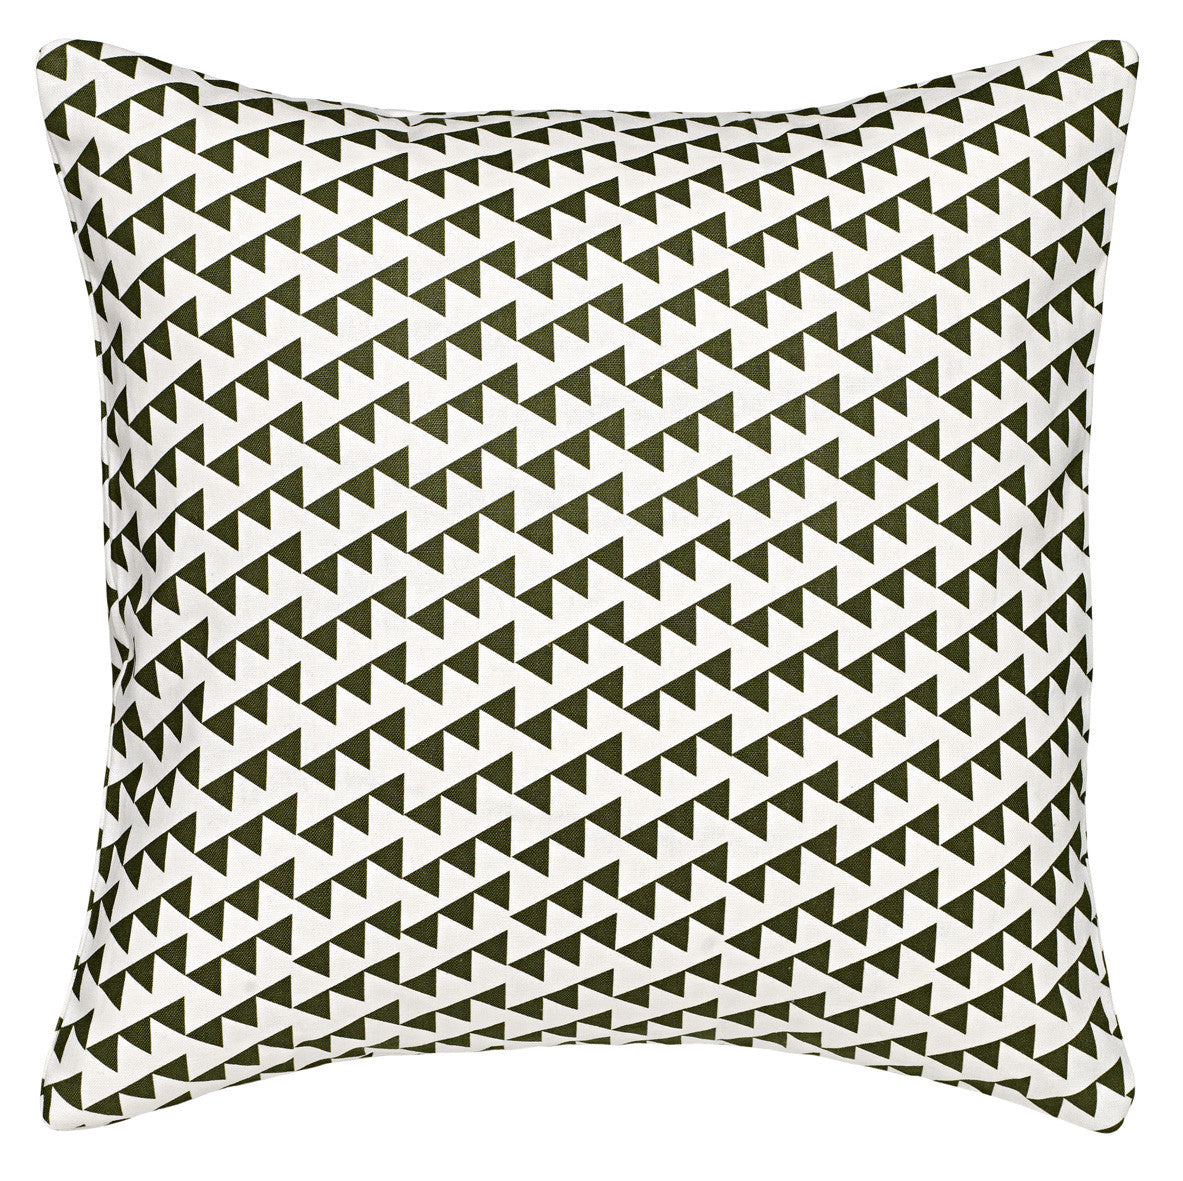 Bunting Geometric Pattern Linen Cotton Decorative Throw Pillow in Olive Green 45x45cm (18x18")